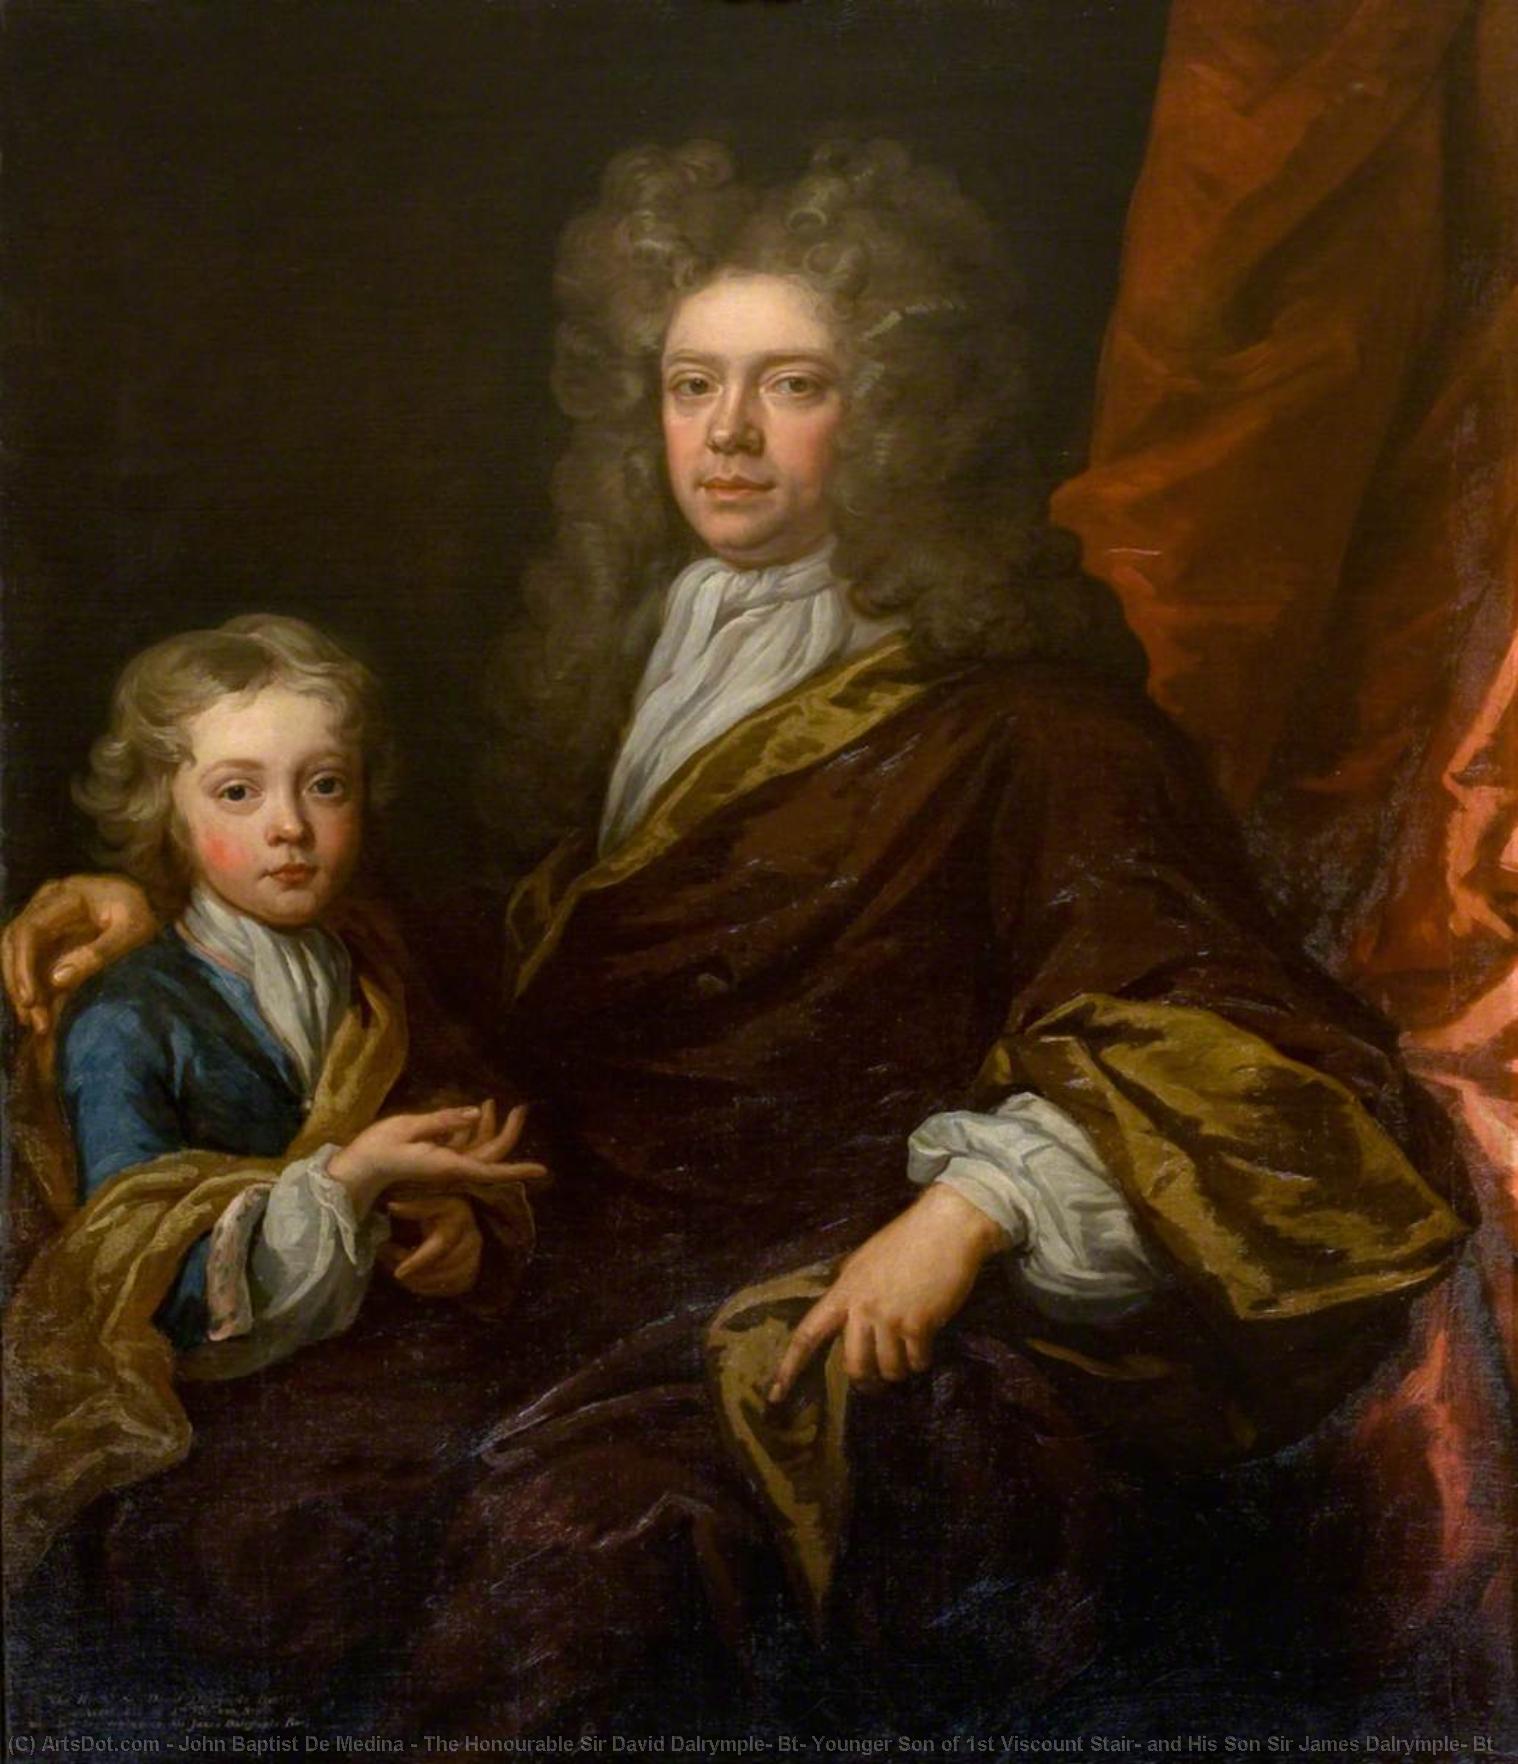 Buy Museum Art Reproductions The Honourable Sir David Dalrymple, Bt, Younger Son of 1st Viscount Stair, and His Son Sir James Dalrymple, Bt by John Baptist De Medina (1659-1710) | ArtsDot.com